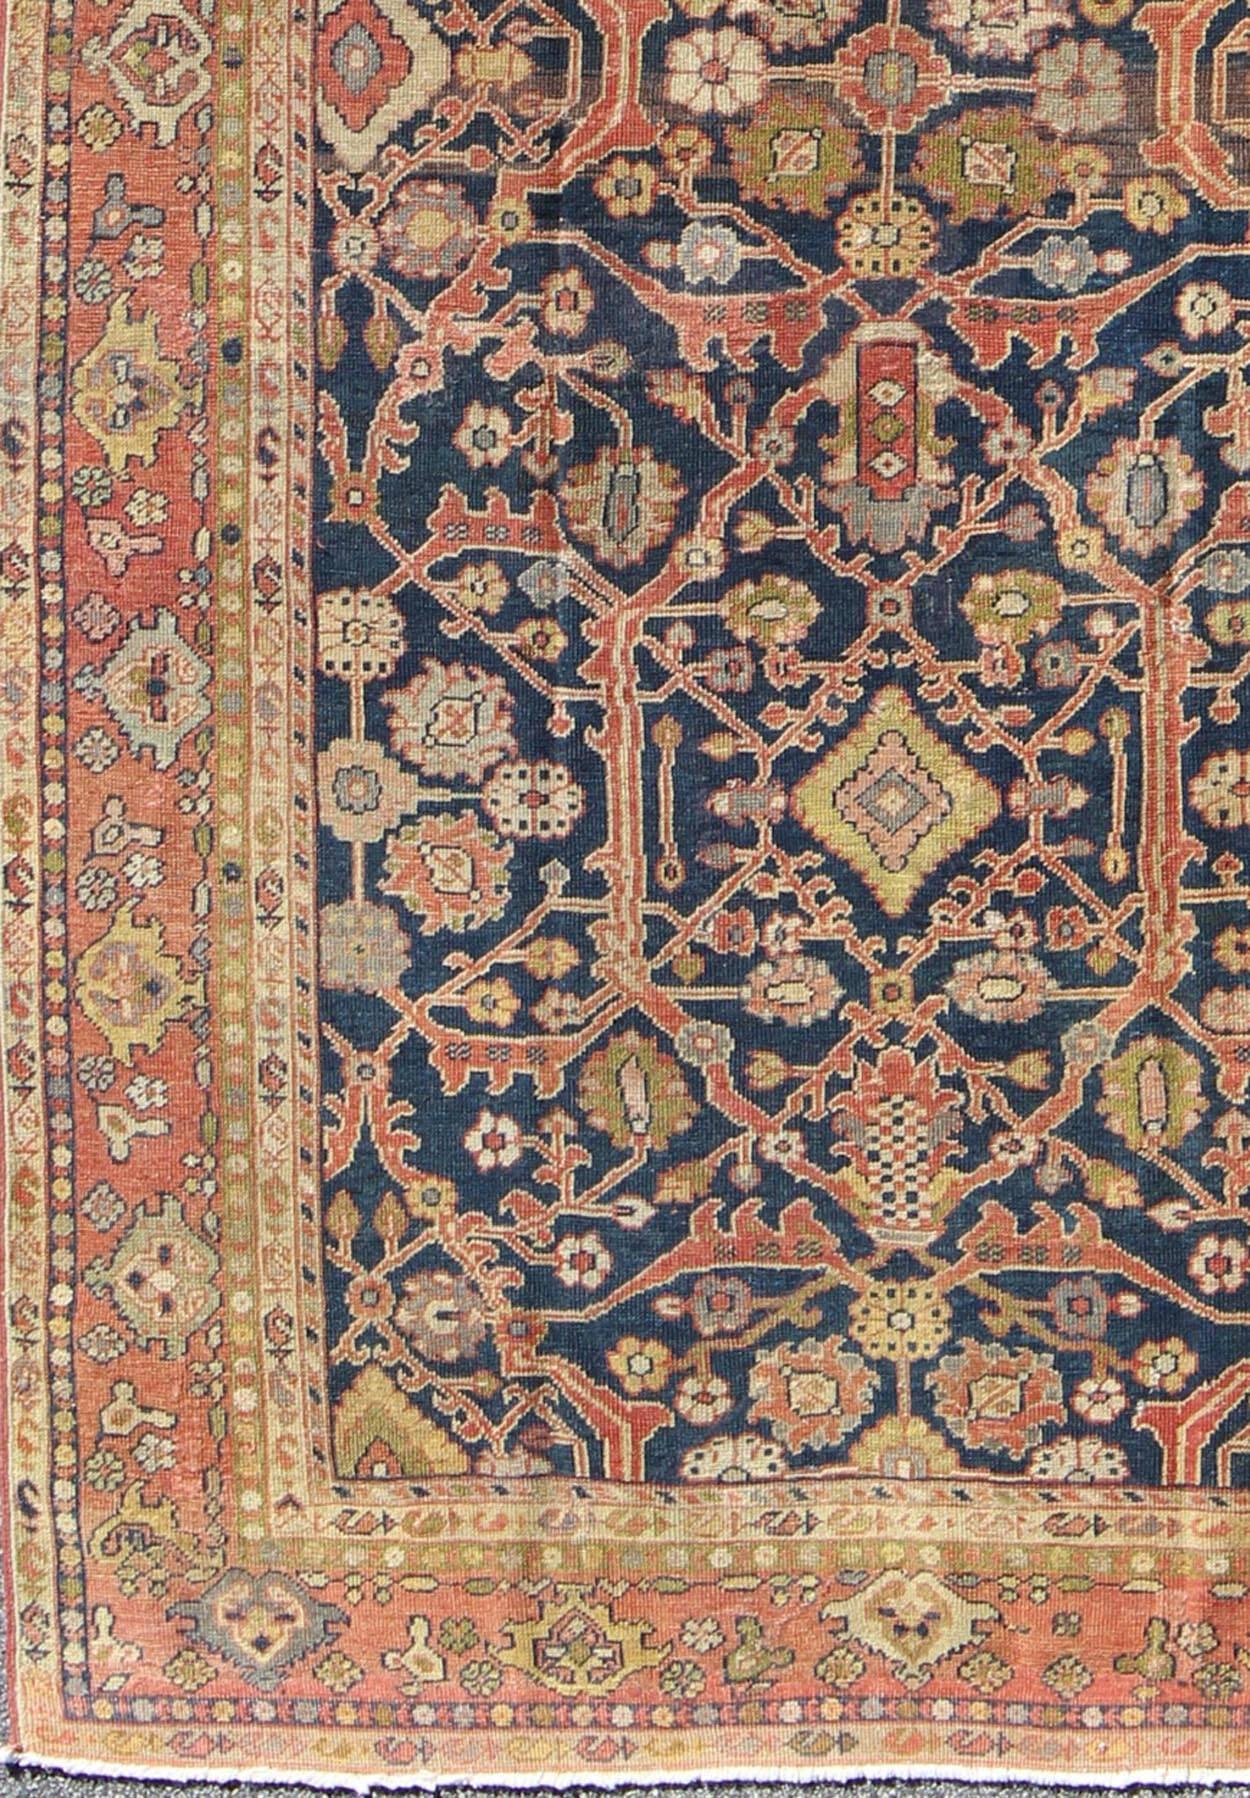 Antique Persian Sultanabad Gallery Rug with All over Design in Blue Background.
This Antique Sultanabad displays a glorious all-over design imbued with a rich palette of colors. Breathtaking flowers of various colors interweave throughout the main